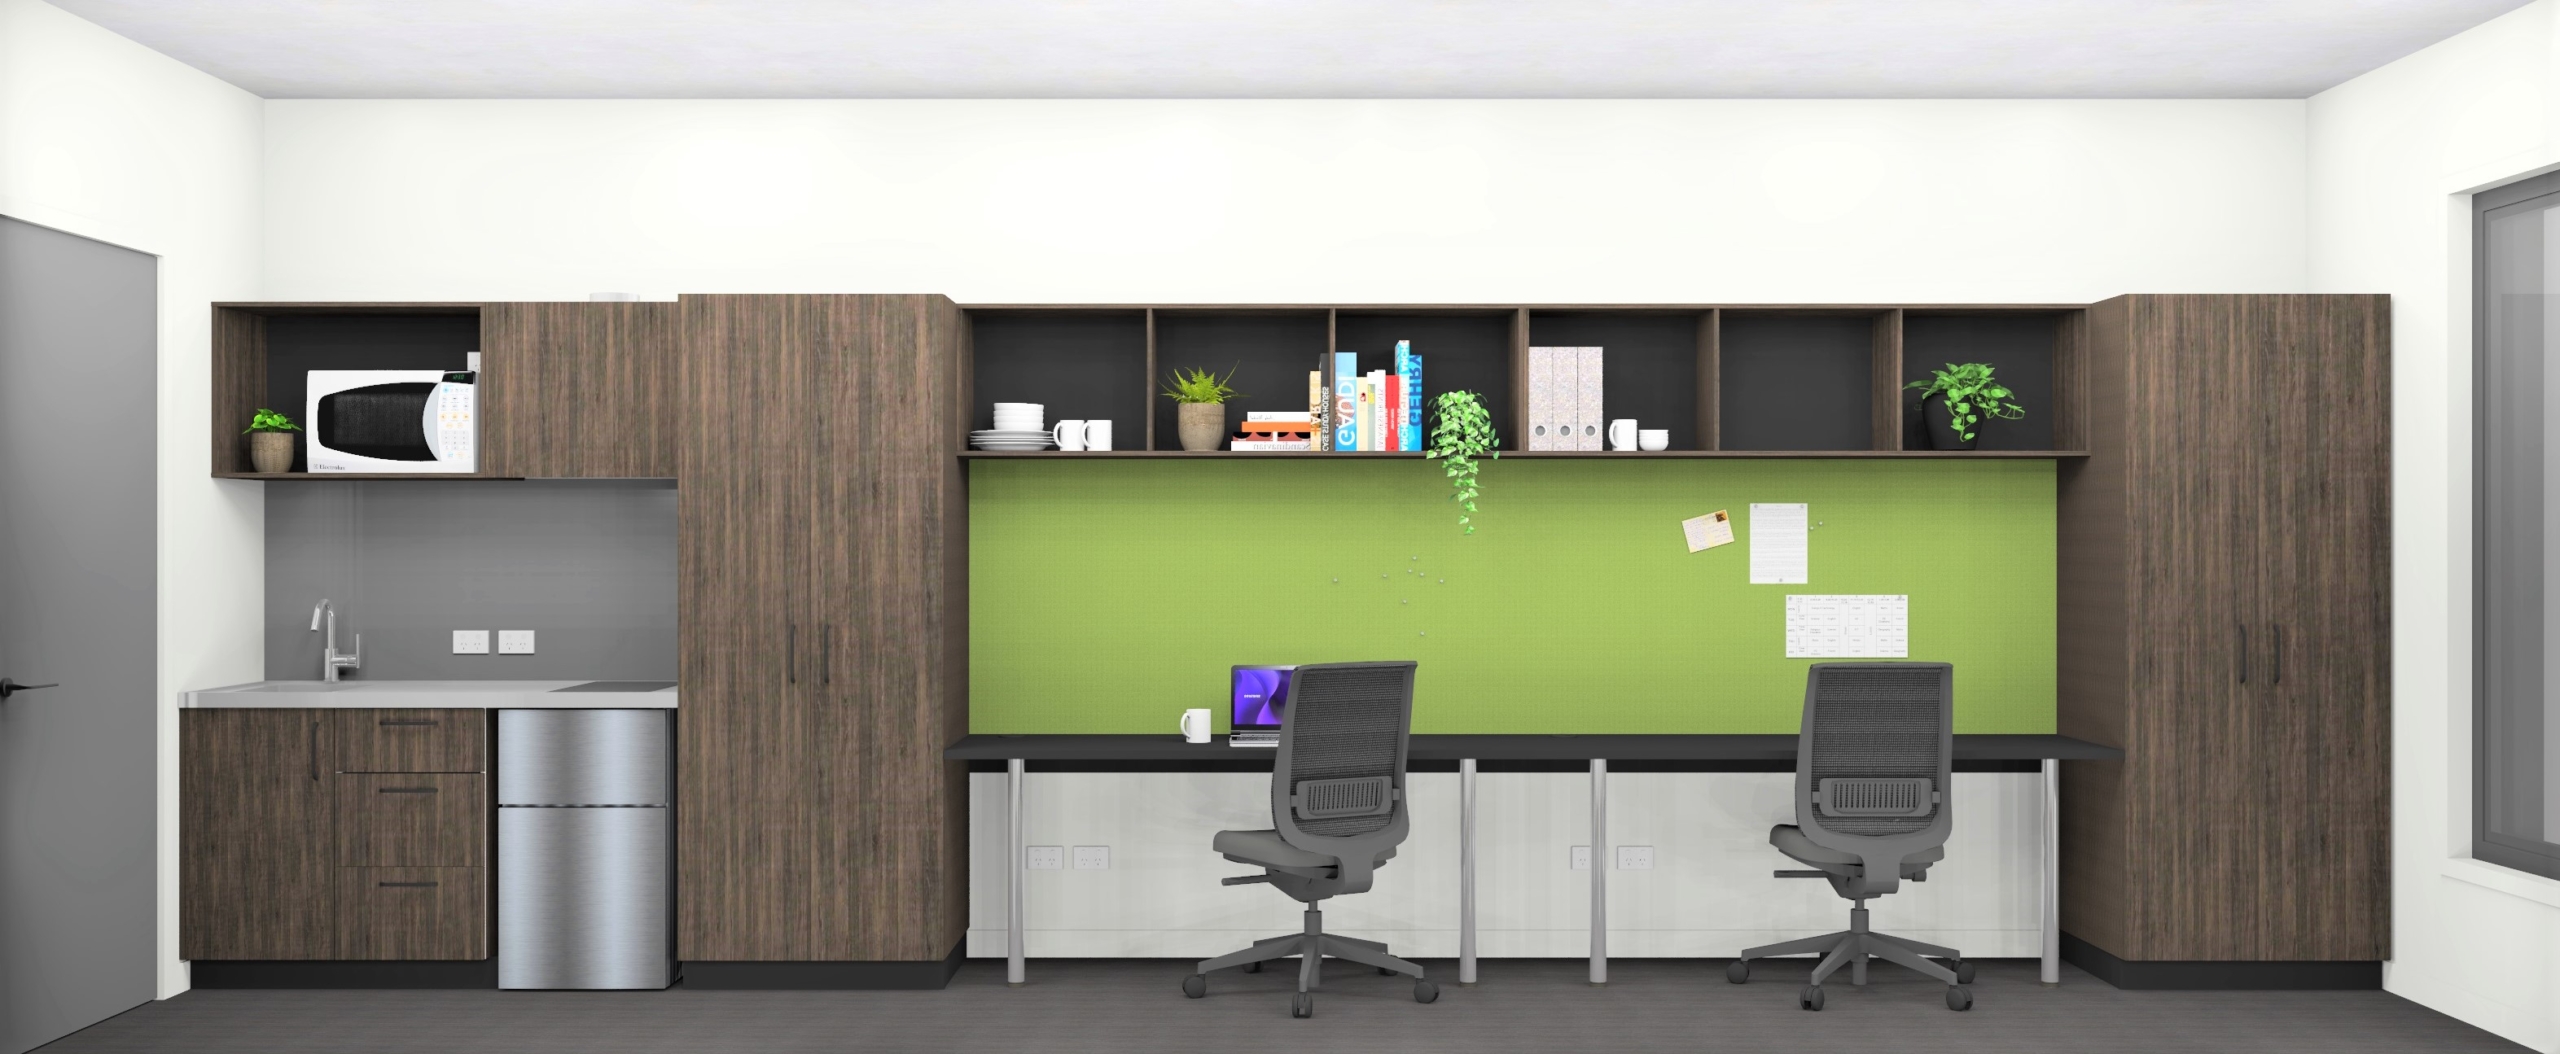 Compac Commercial Render 20